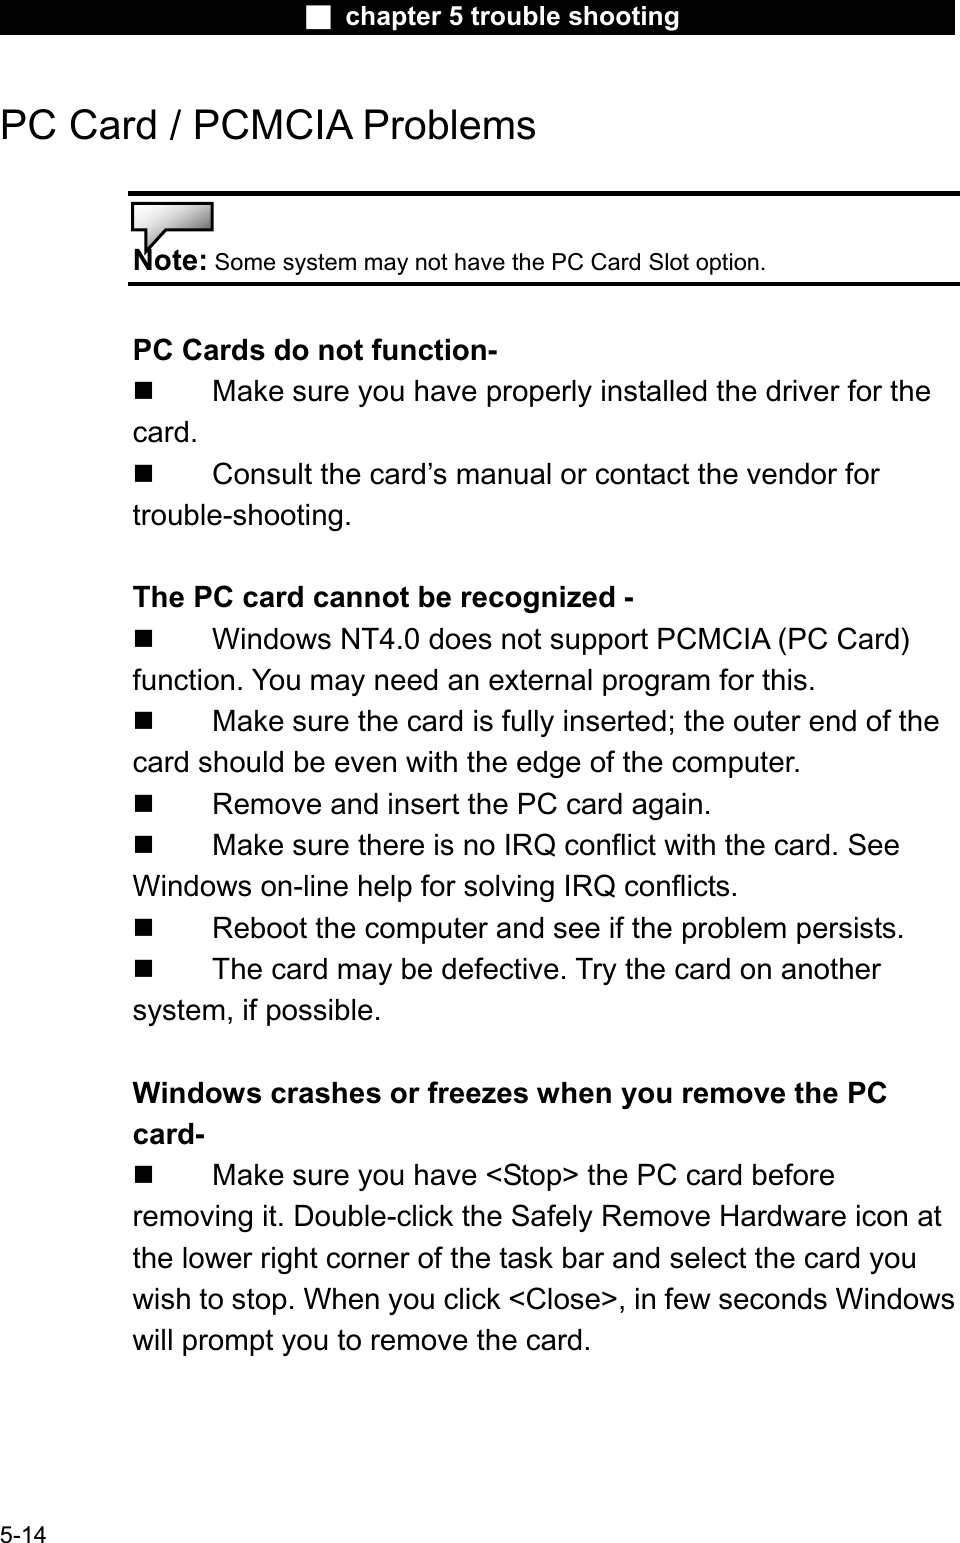 Ϯ chapter 5 trouble shootingPC Card / PCMCIA Problems Note: Some system may not have the PC Card Slot option.PC Cards do not function- Make sure you have properly installed the driver for thecard. Consult the card’s manual or contact the vendor for trouble-shooting.The PC card cannot be recognized -  Windows NT4.0 does not support PCMCIA (PC Card)function. You may need an external program for this. Make sure the card is fully inserted; the outer end of the card should be even with the edge of the computer. Remove and insert the PC card again. Make sure there is no IRQ conflict with the card. See Windows on-line help for solving IRQ conflicts. Reboot the computer and see if the problem persists. The card may be defective. Try the card on anothersystem, if possible. Windows crashes or freezes when you remove the PC card- Make sure you have &lt;Stop&gt; the PC card before removing it. Double-click the Safely Remove Hardware icon at the lower right corner of the task bar and select the card you wish to stop. When you click &lt;Close&gt;, in few seconds Windowswill prompt you to remove the card. 5-14